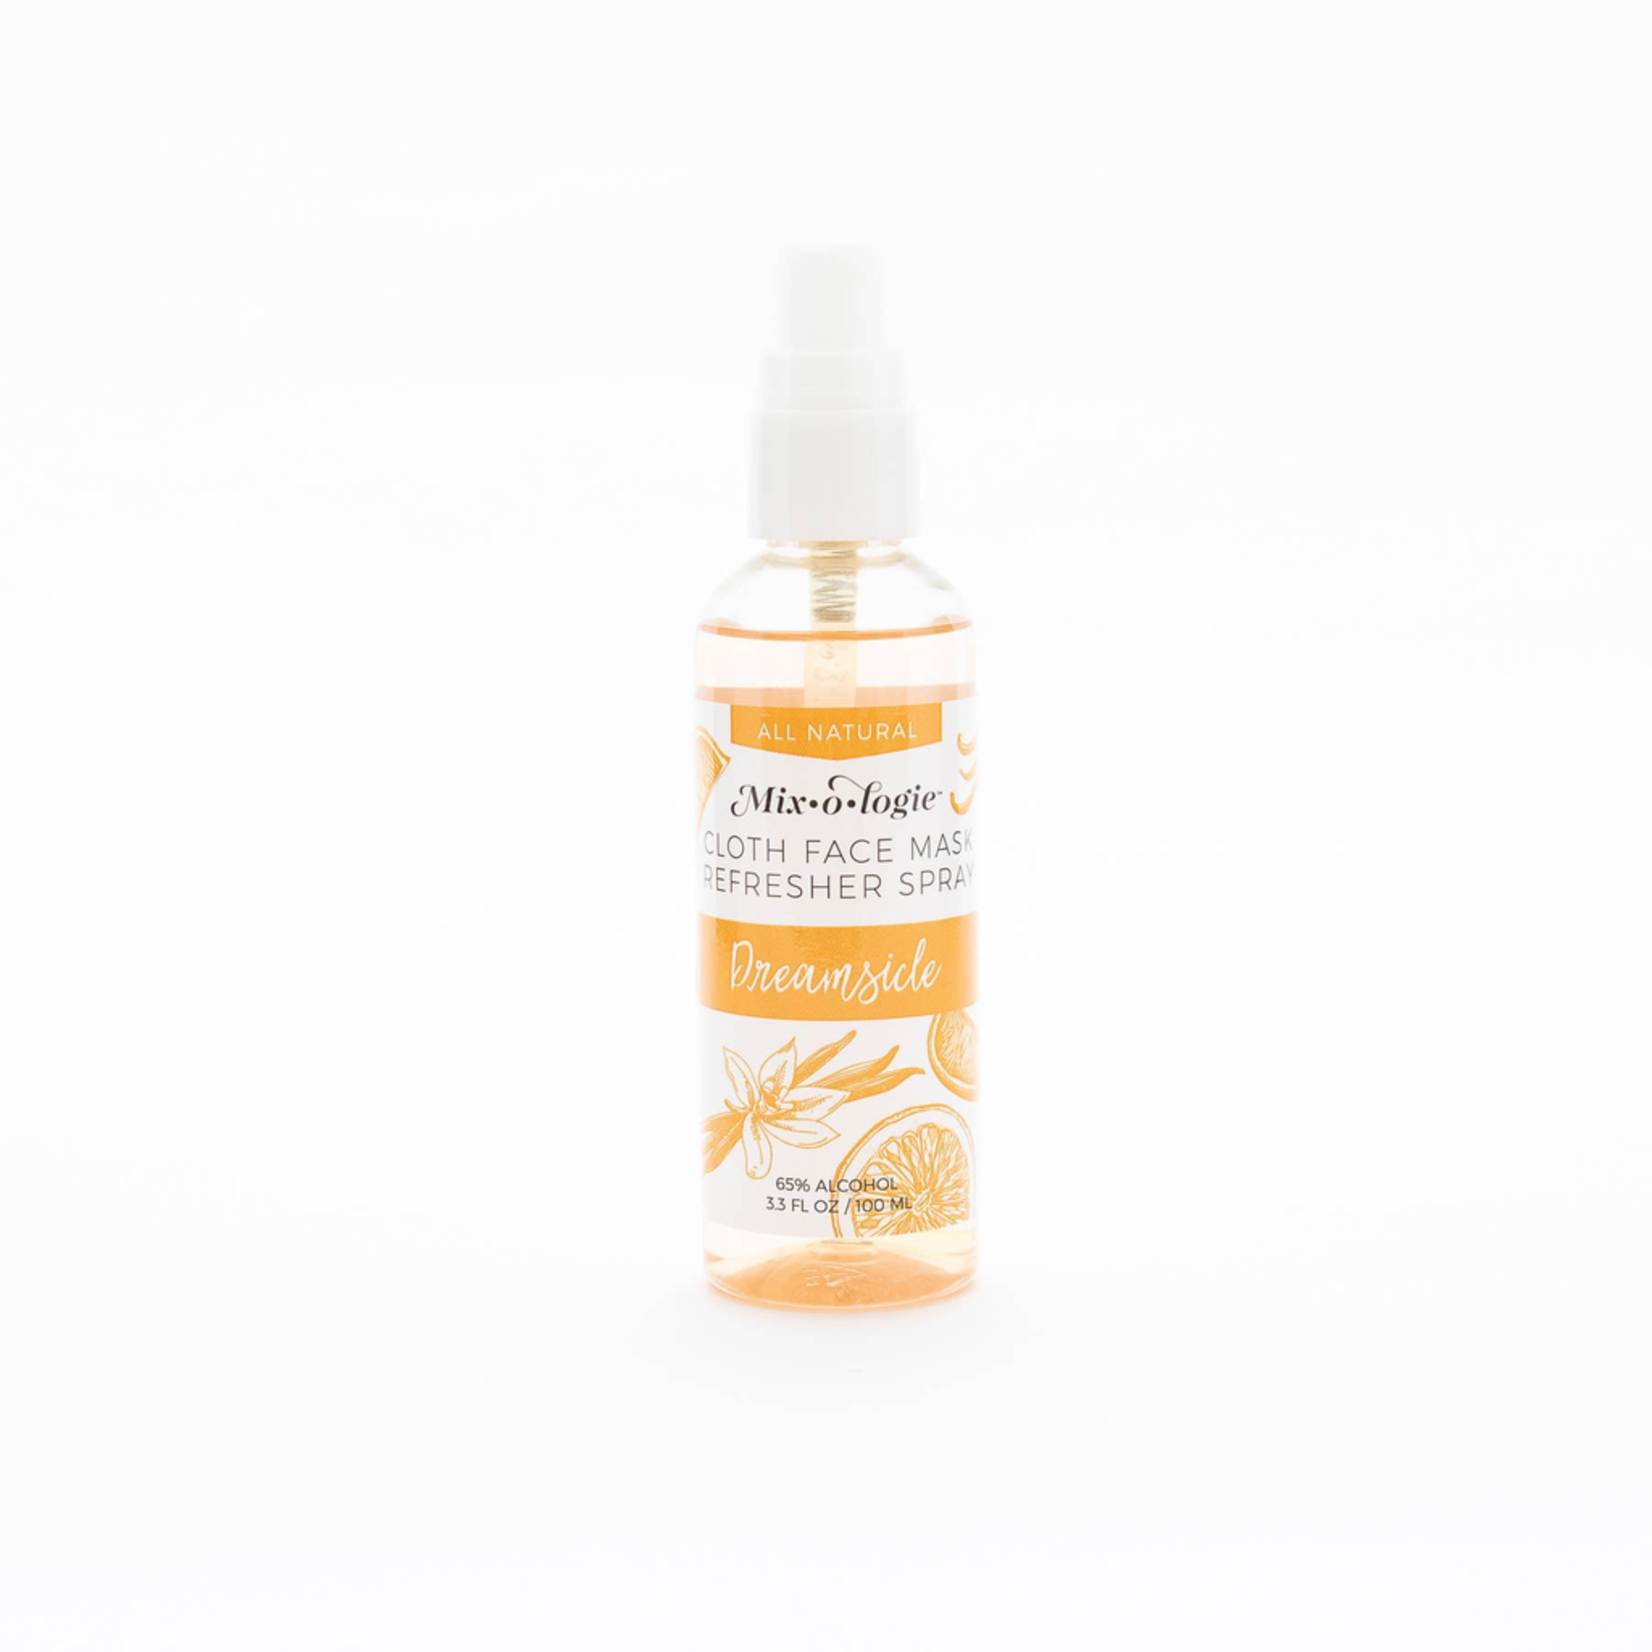 Mixologie Dreamsicle Mask Refresher